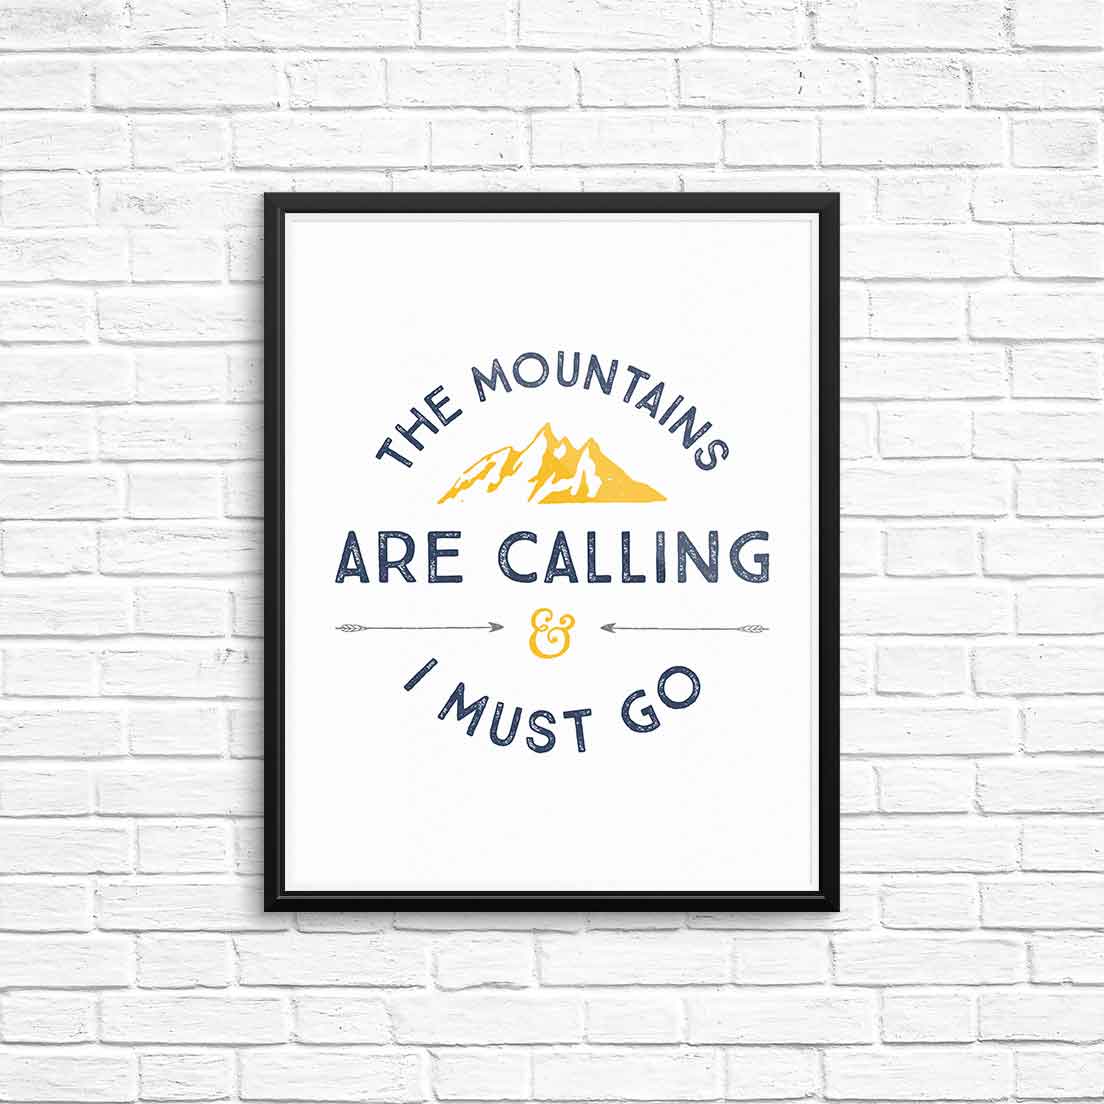 The Mountains Are Calling & I Must Go | Download this FREE printable 8x10 wall art to add a bit of rustic, outdoor charm to any room. Pinning for later! 